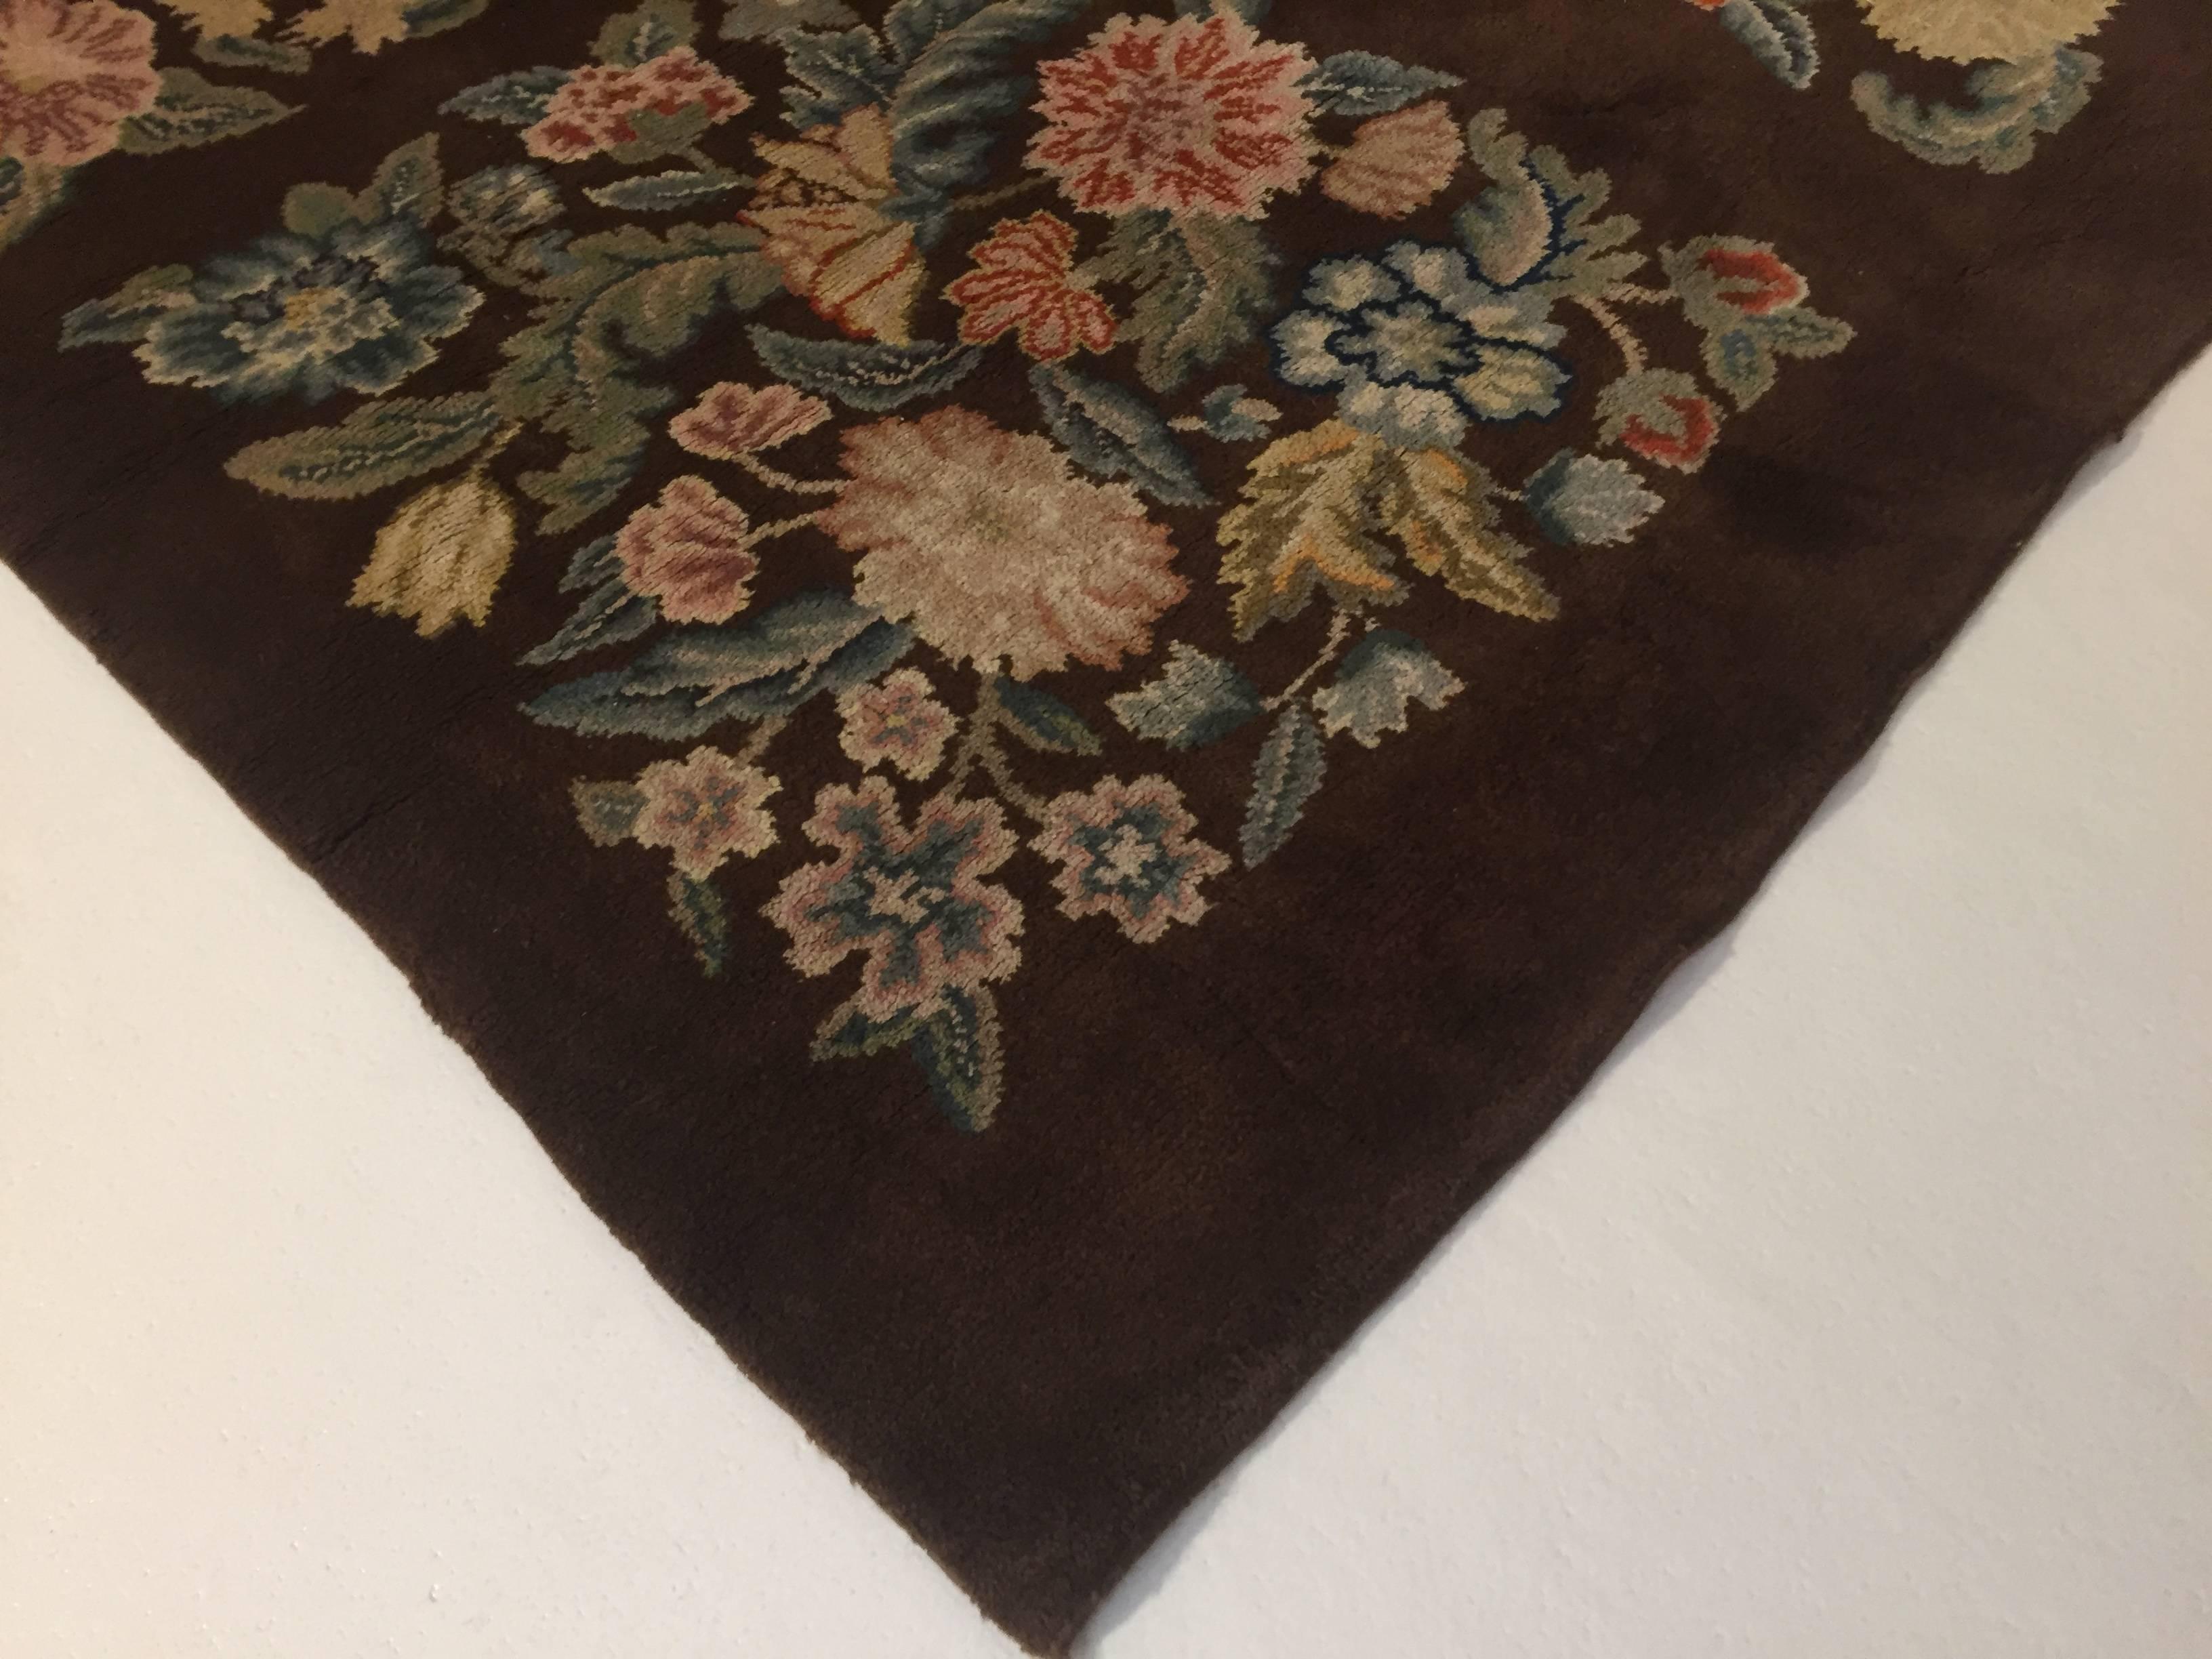 20th Century Art Deco Hand-Knotted Savonerie Square Rug Wool Brown Floral For Sale 8